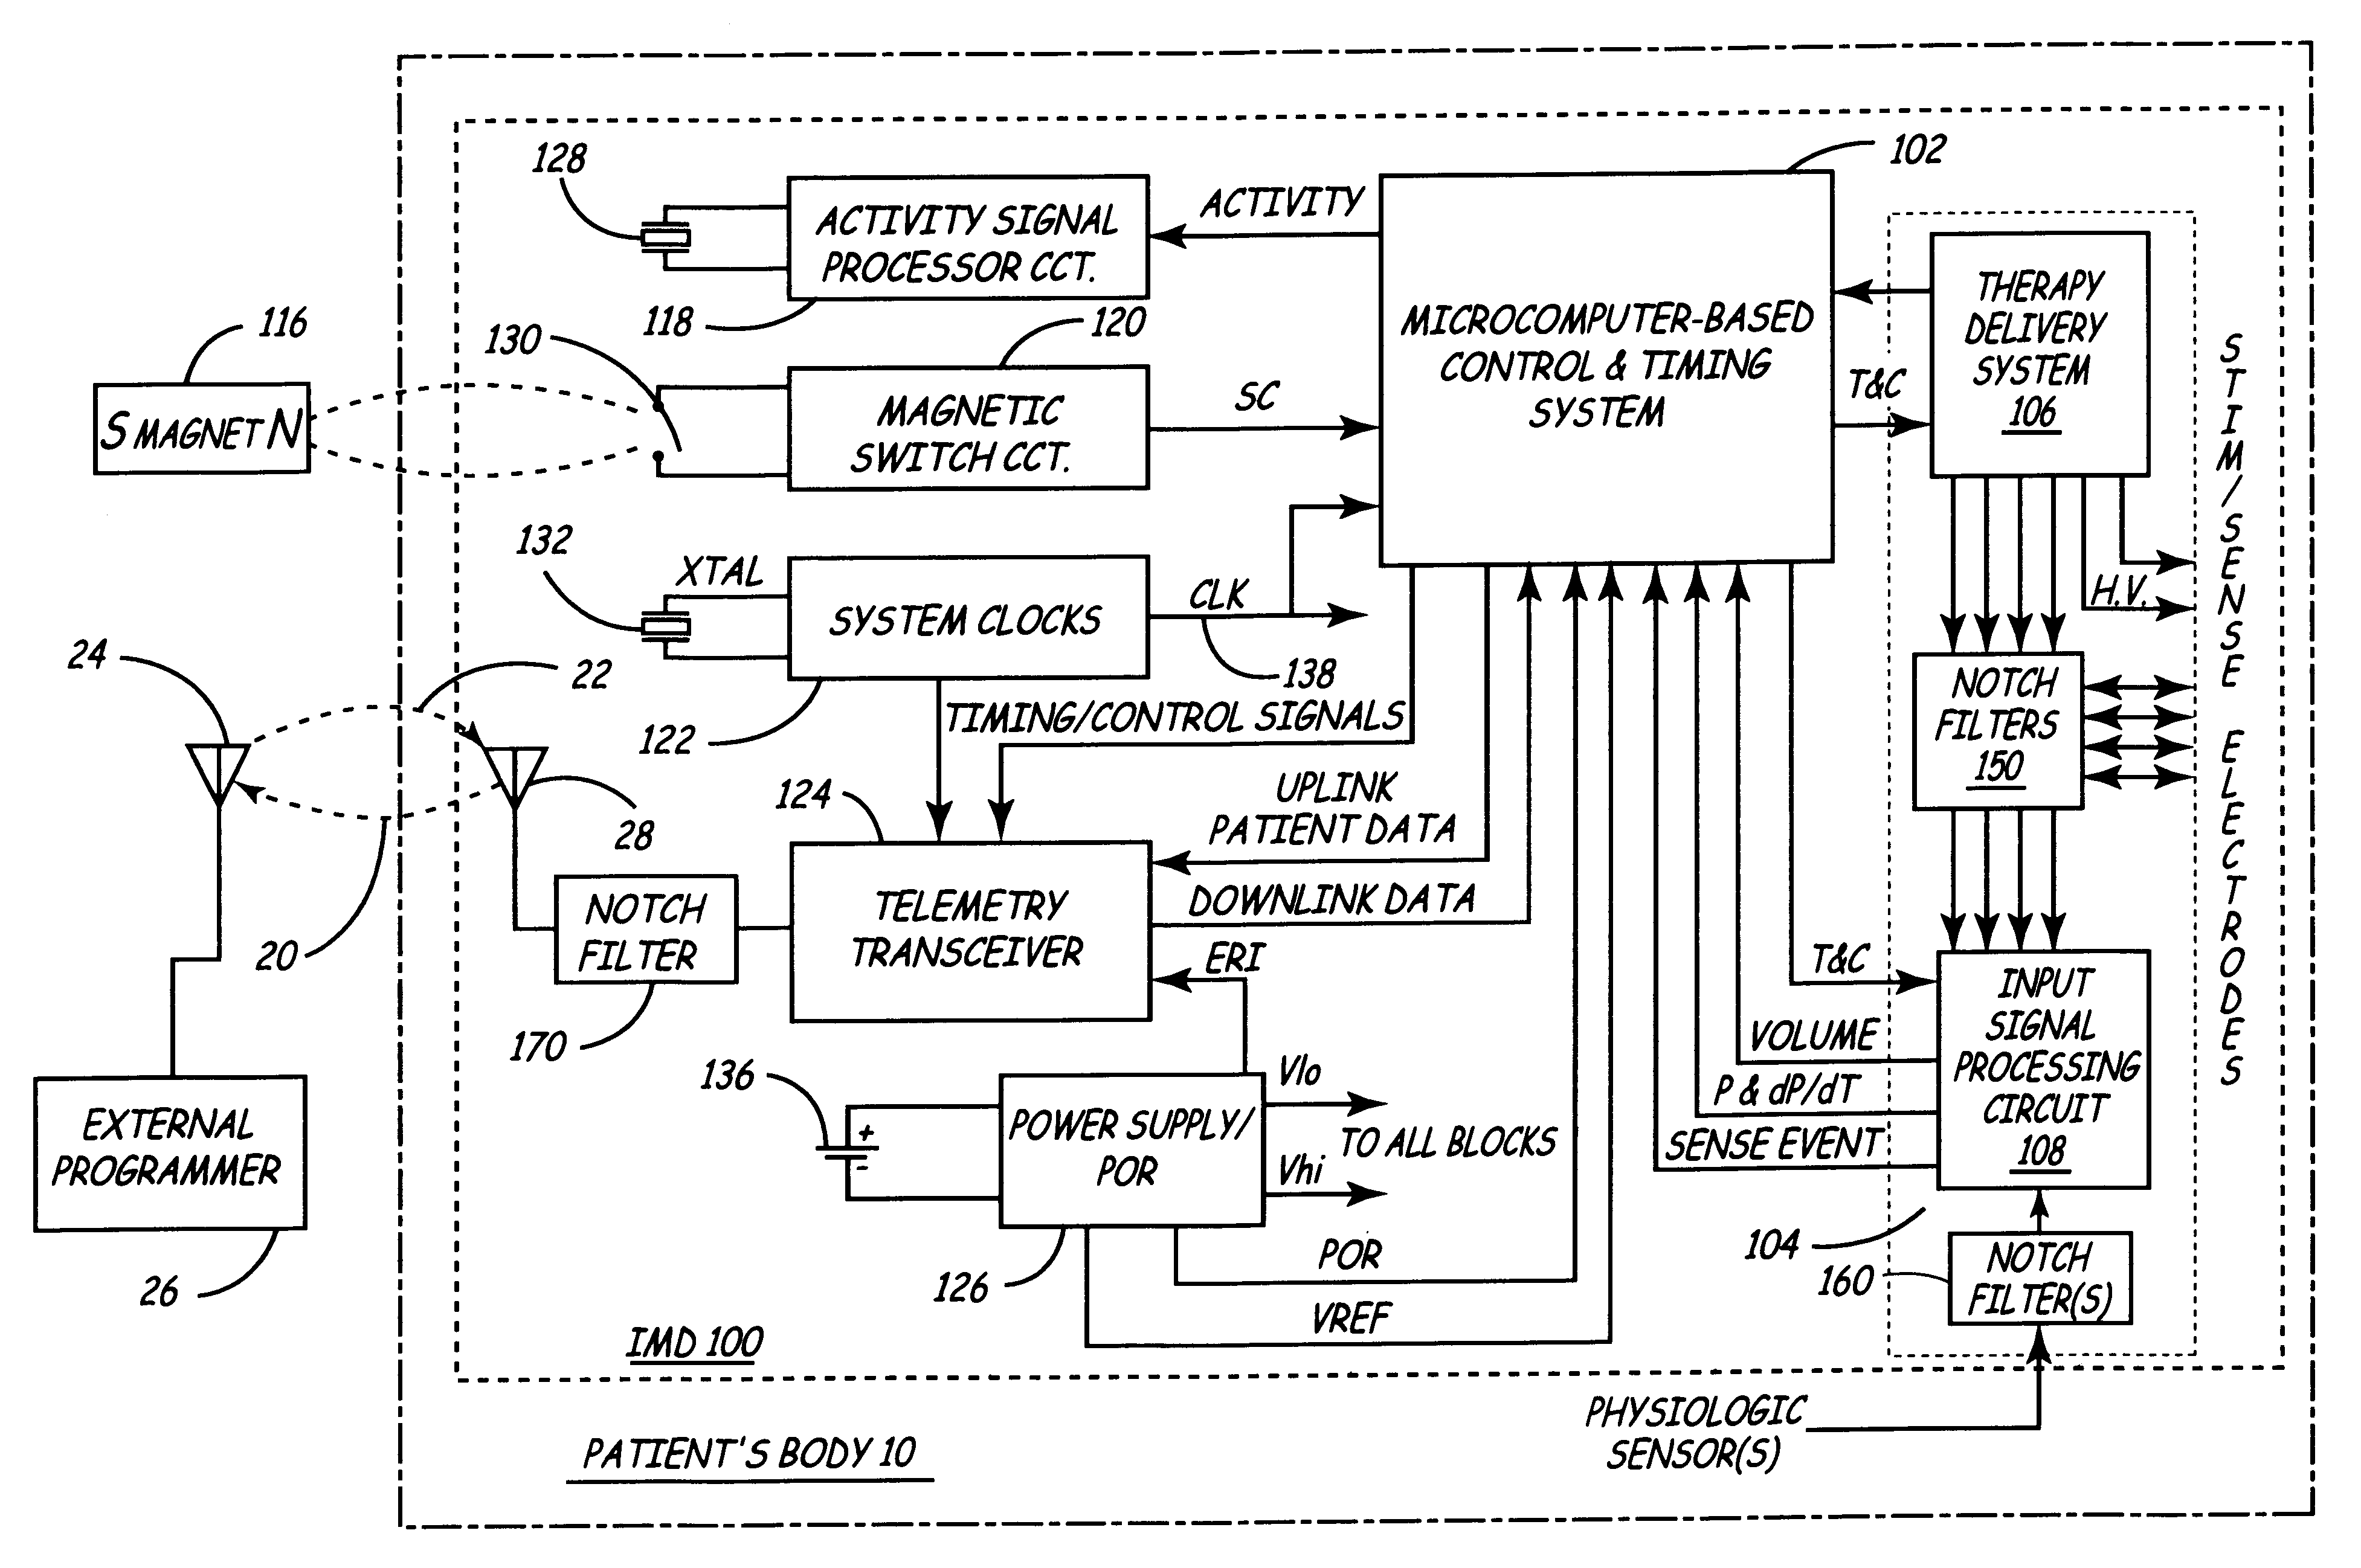 Implantable medical device incorporating integrated circuit notch filters